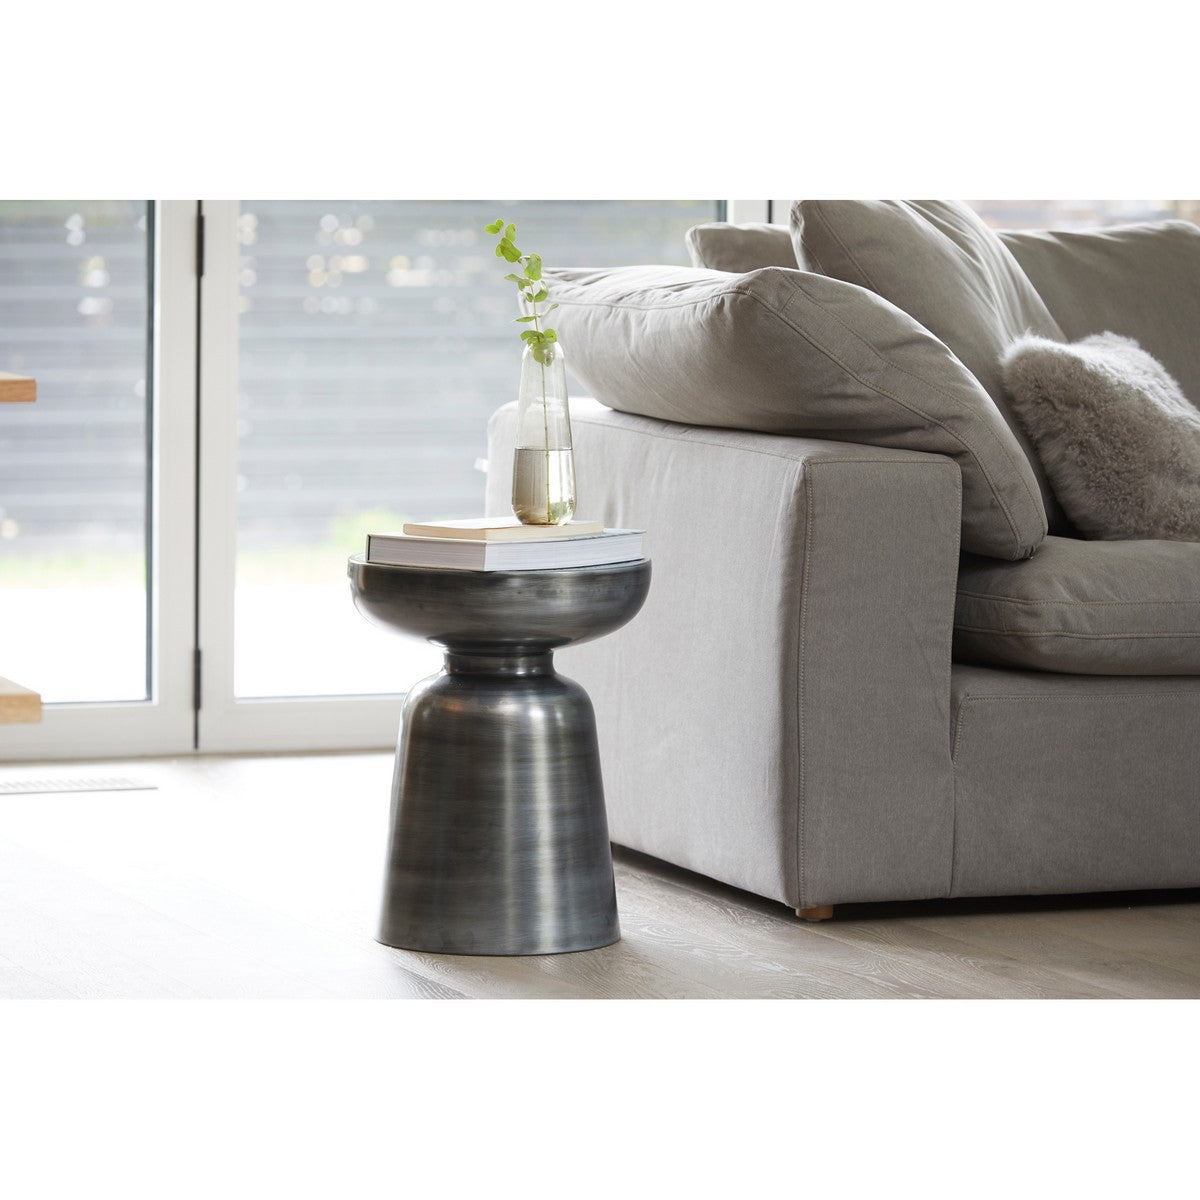 Moe's Home Collection Clay Corner Chair Livesmart Fabric Light Grey - YJ-1000-29 - Moe's Home Collection - Corner Chairs - Minimal And Modern - 1